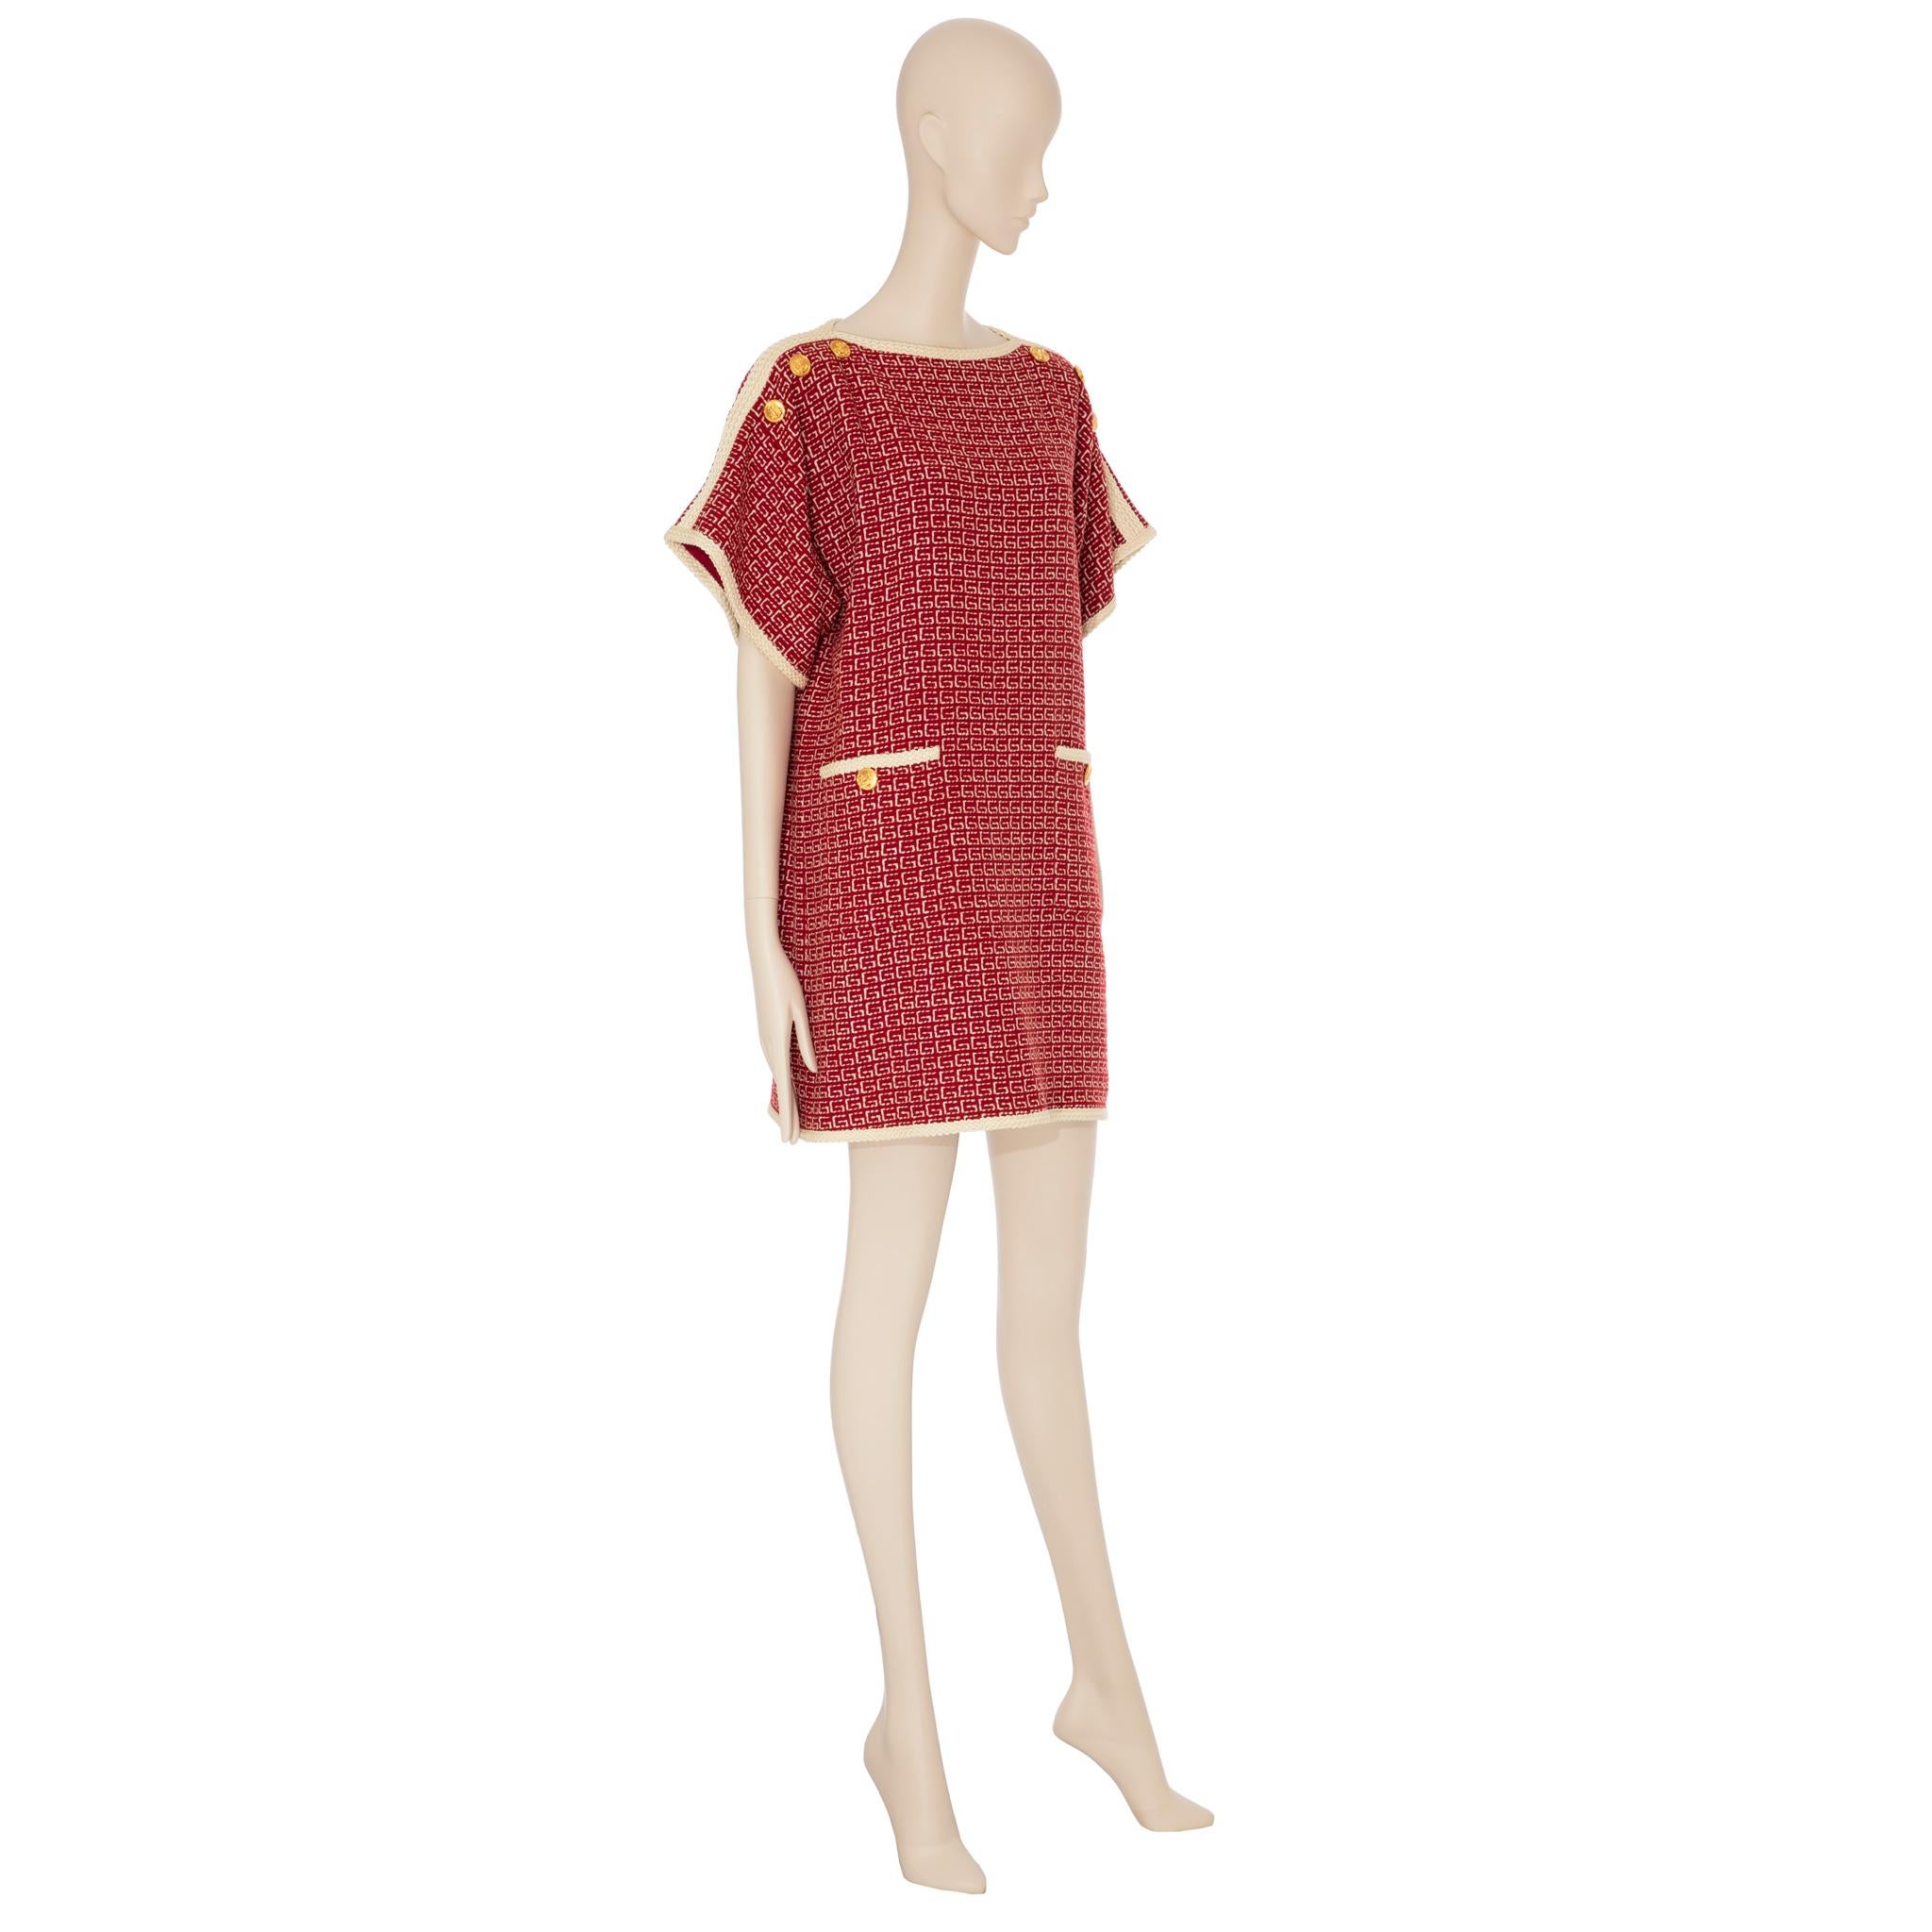  

Gucci Tweed Red And Off-White Tunic Dress 

Brand:

Gucci

Product:

Tweed Red & Off-White Tunic Dress

Size:

38 It

Colour:

Red & Off-White

Material

46% Wool, 31% Acrylic, 16% Polyester, 6% Polyamide, 1% Viscose

Condition:

Pristine; New Or